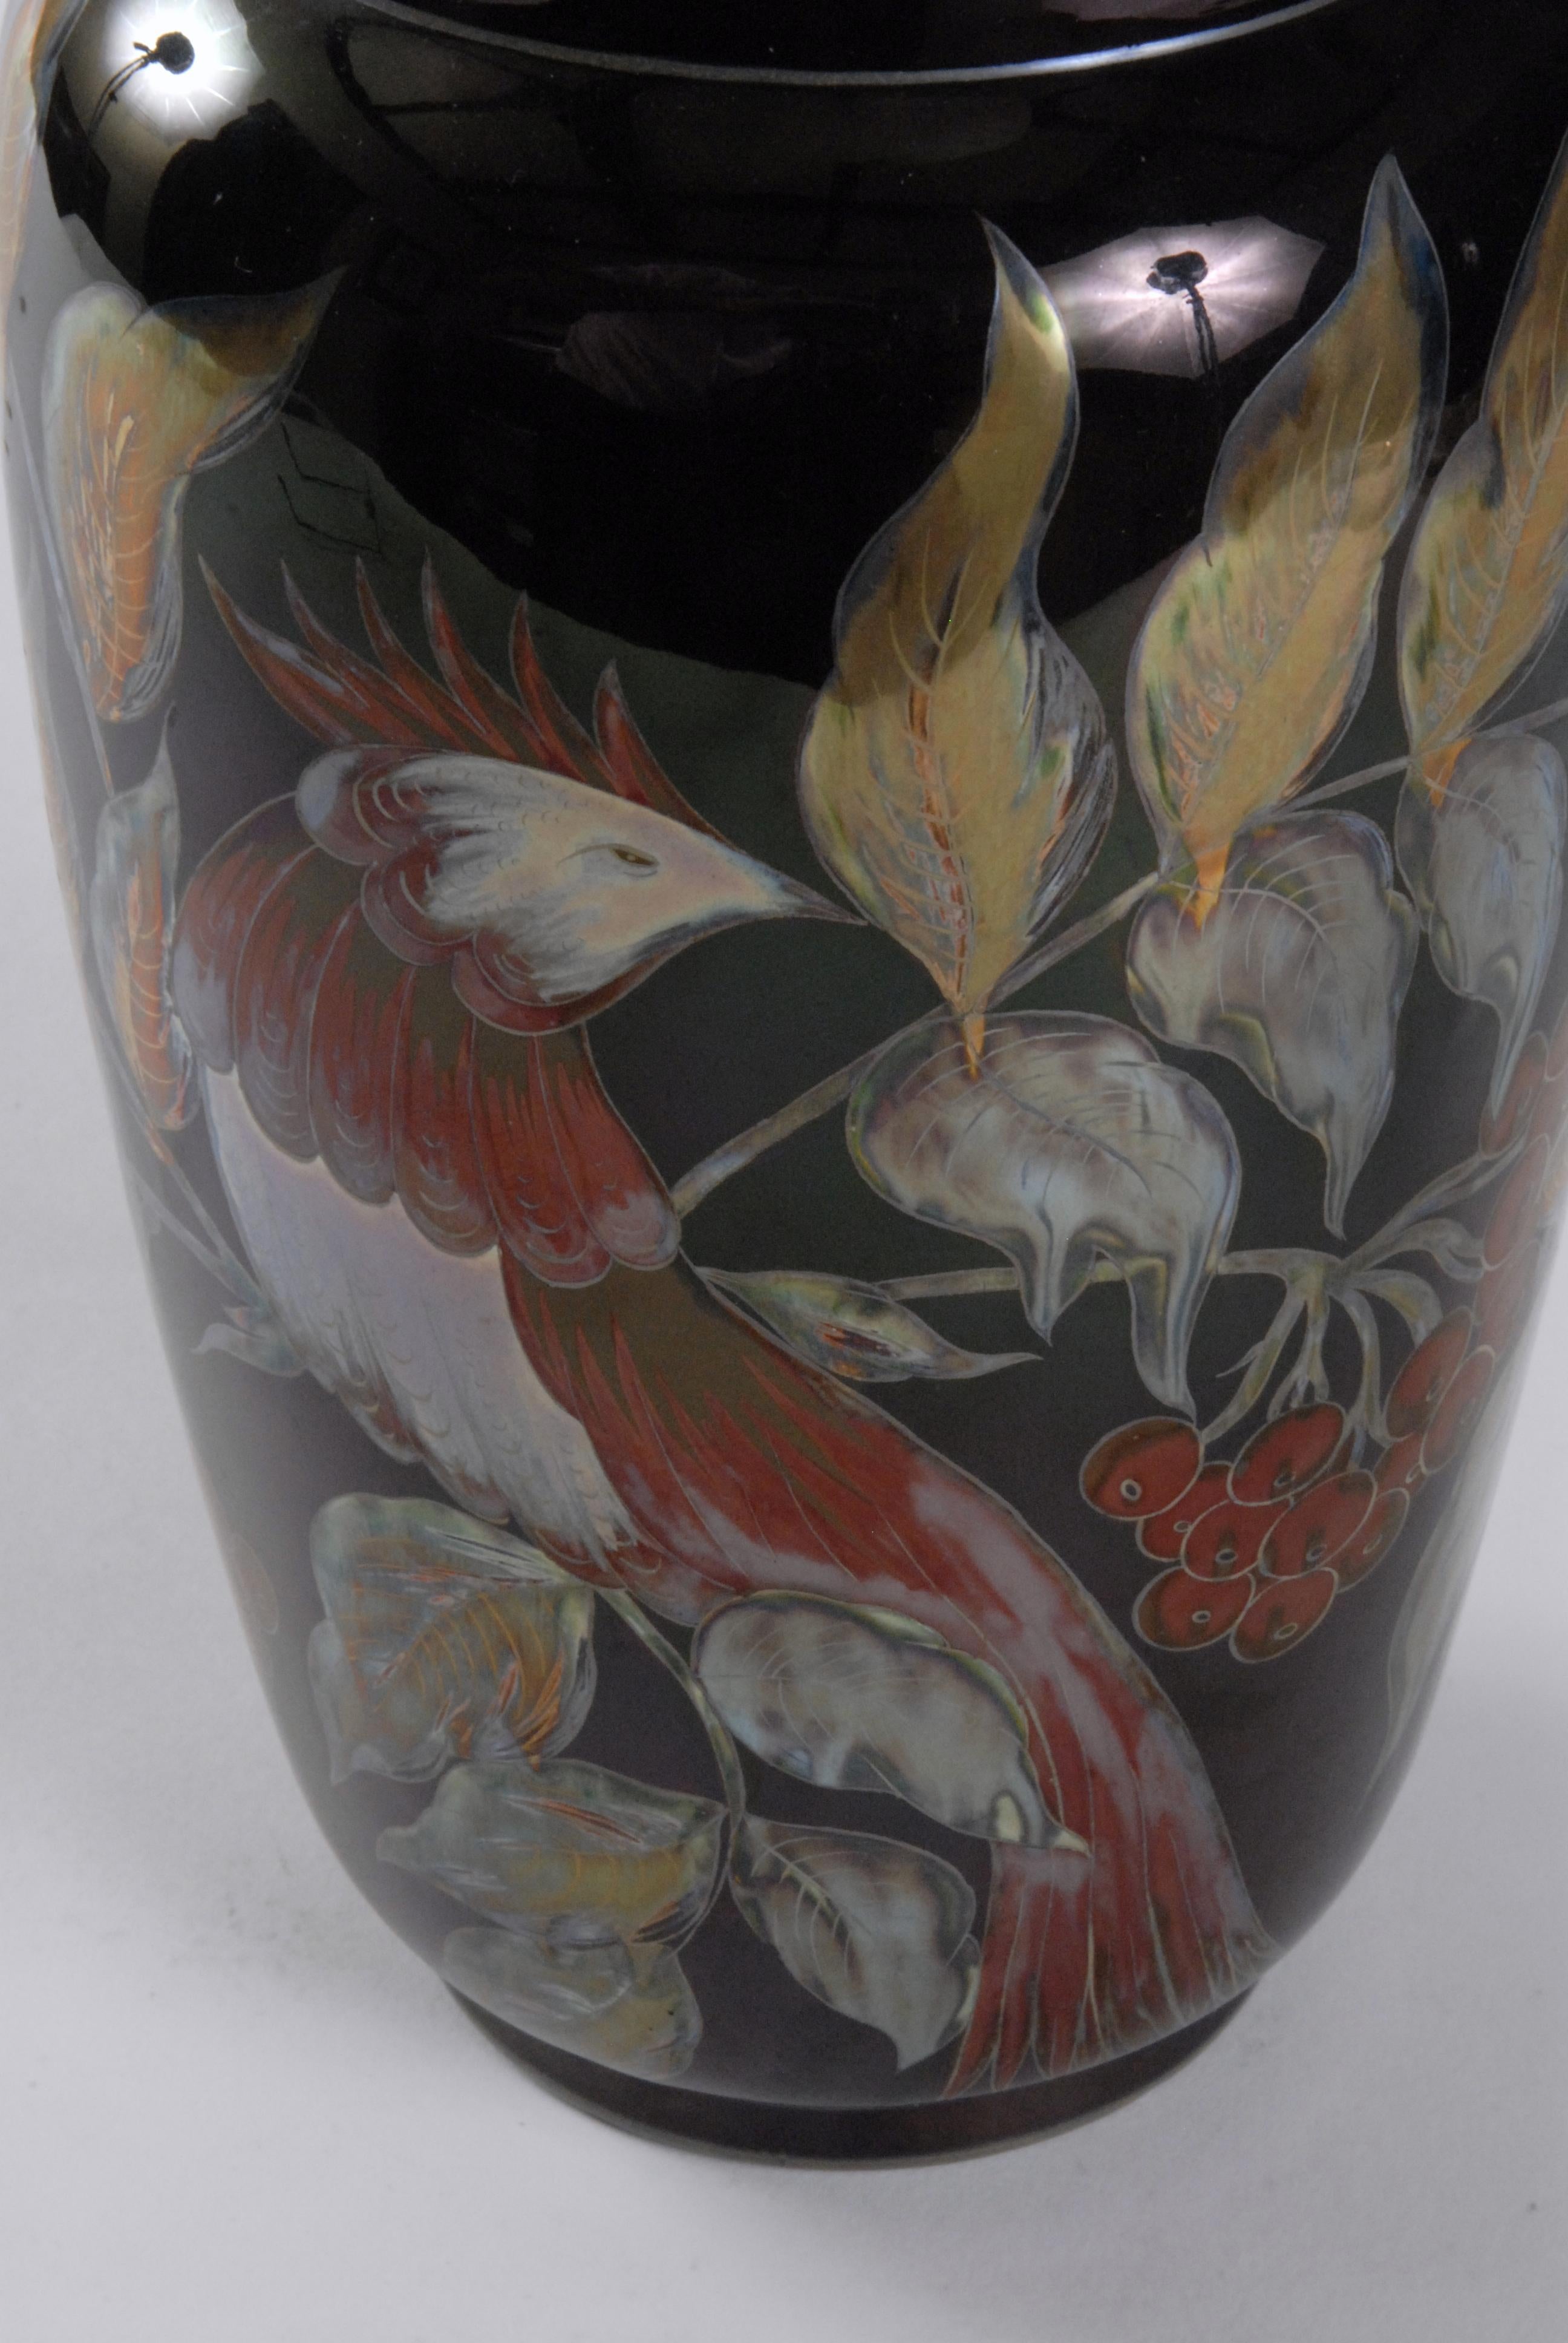 A beautifully hand painted Zsolnay Eosin glazed vase with birds on fruiting stems and leaves. Fully marked on the base. Superb quality from this famous Hungarian factory.